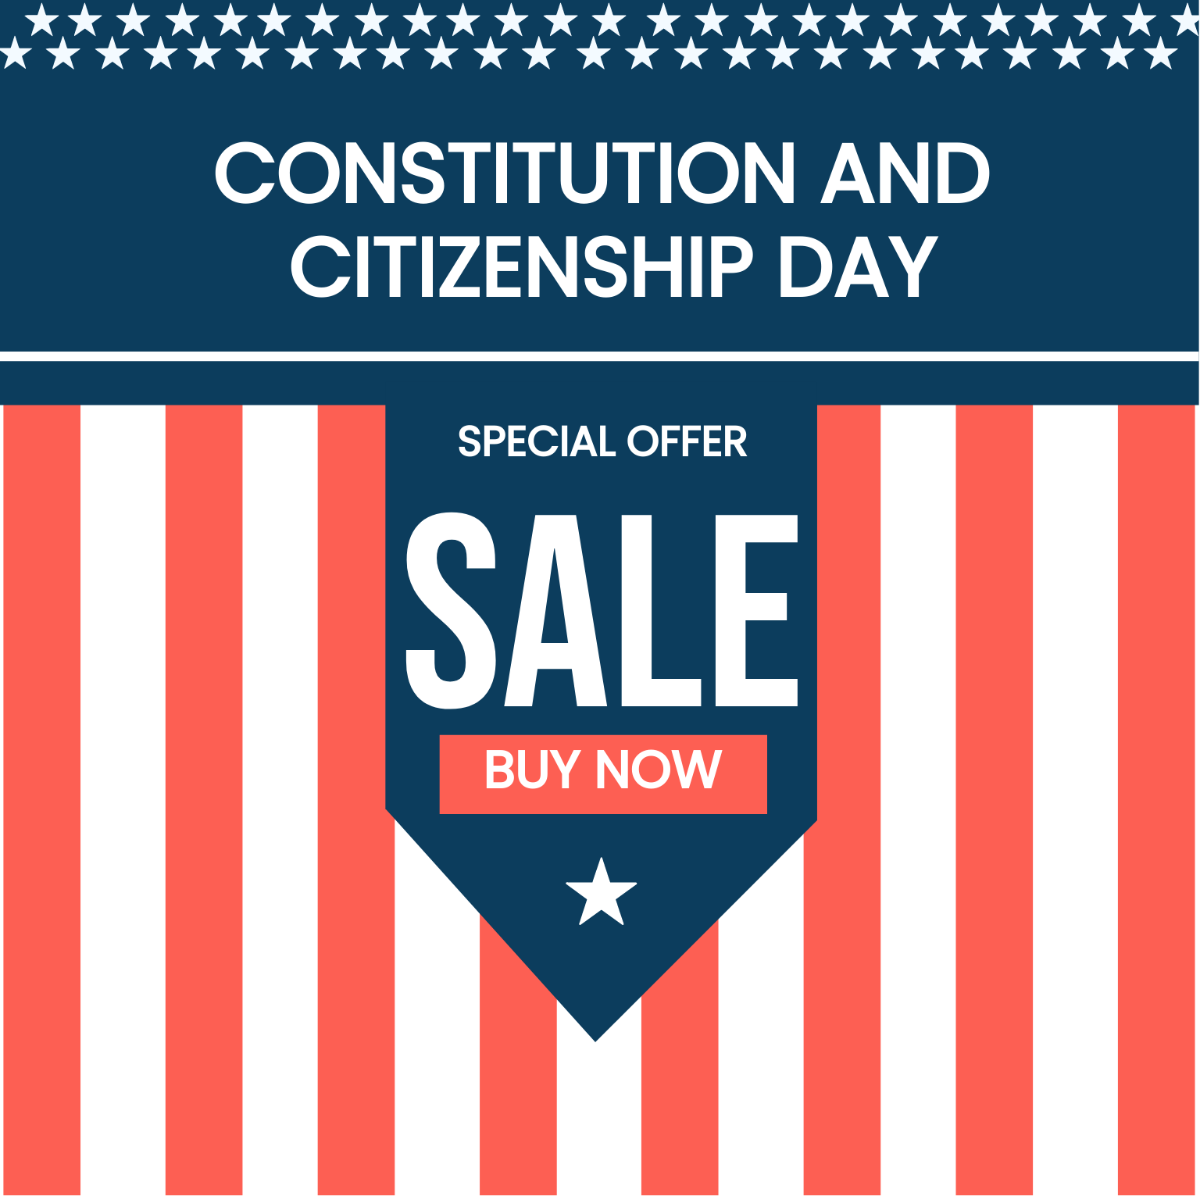 Constitution and Citizenship Day Sale Illustration